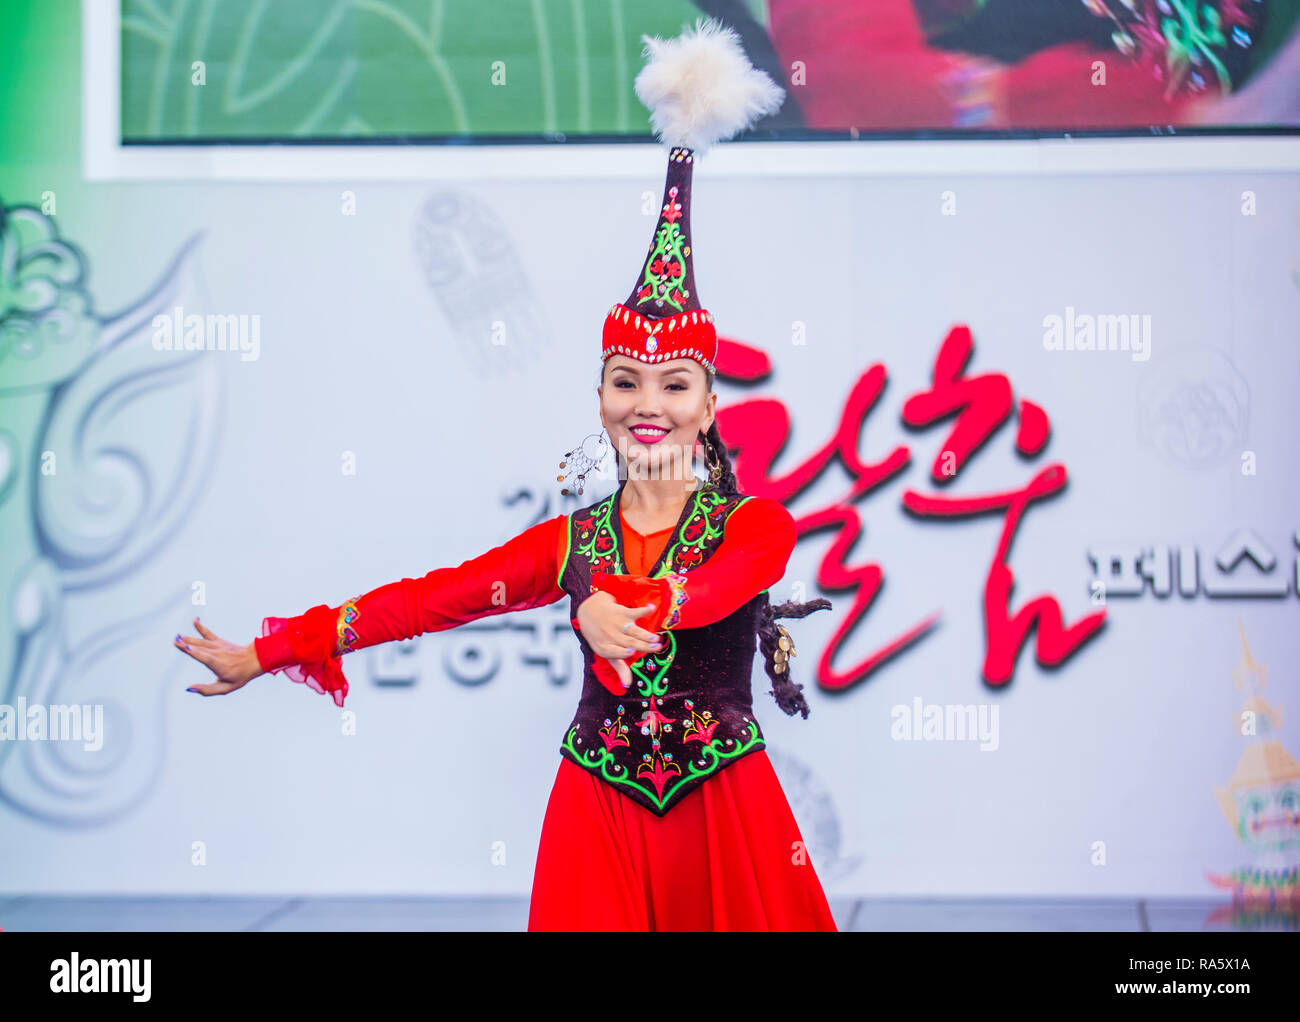 Dancer from the Exemplary Choreographic Ensemble Sholpan perform at the Maskdance festival held in Andong South Korea Stock Photo